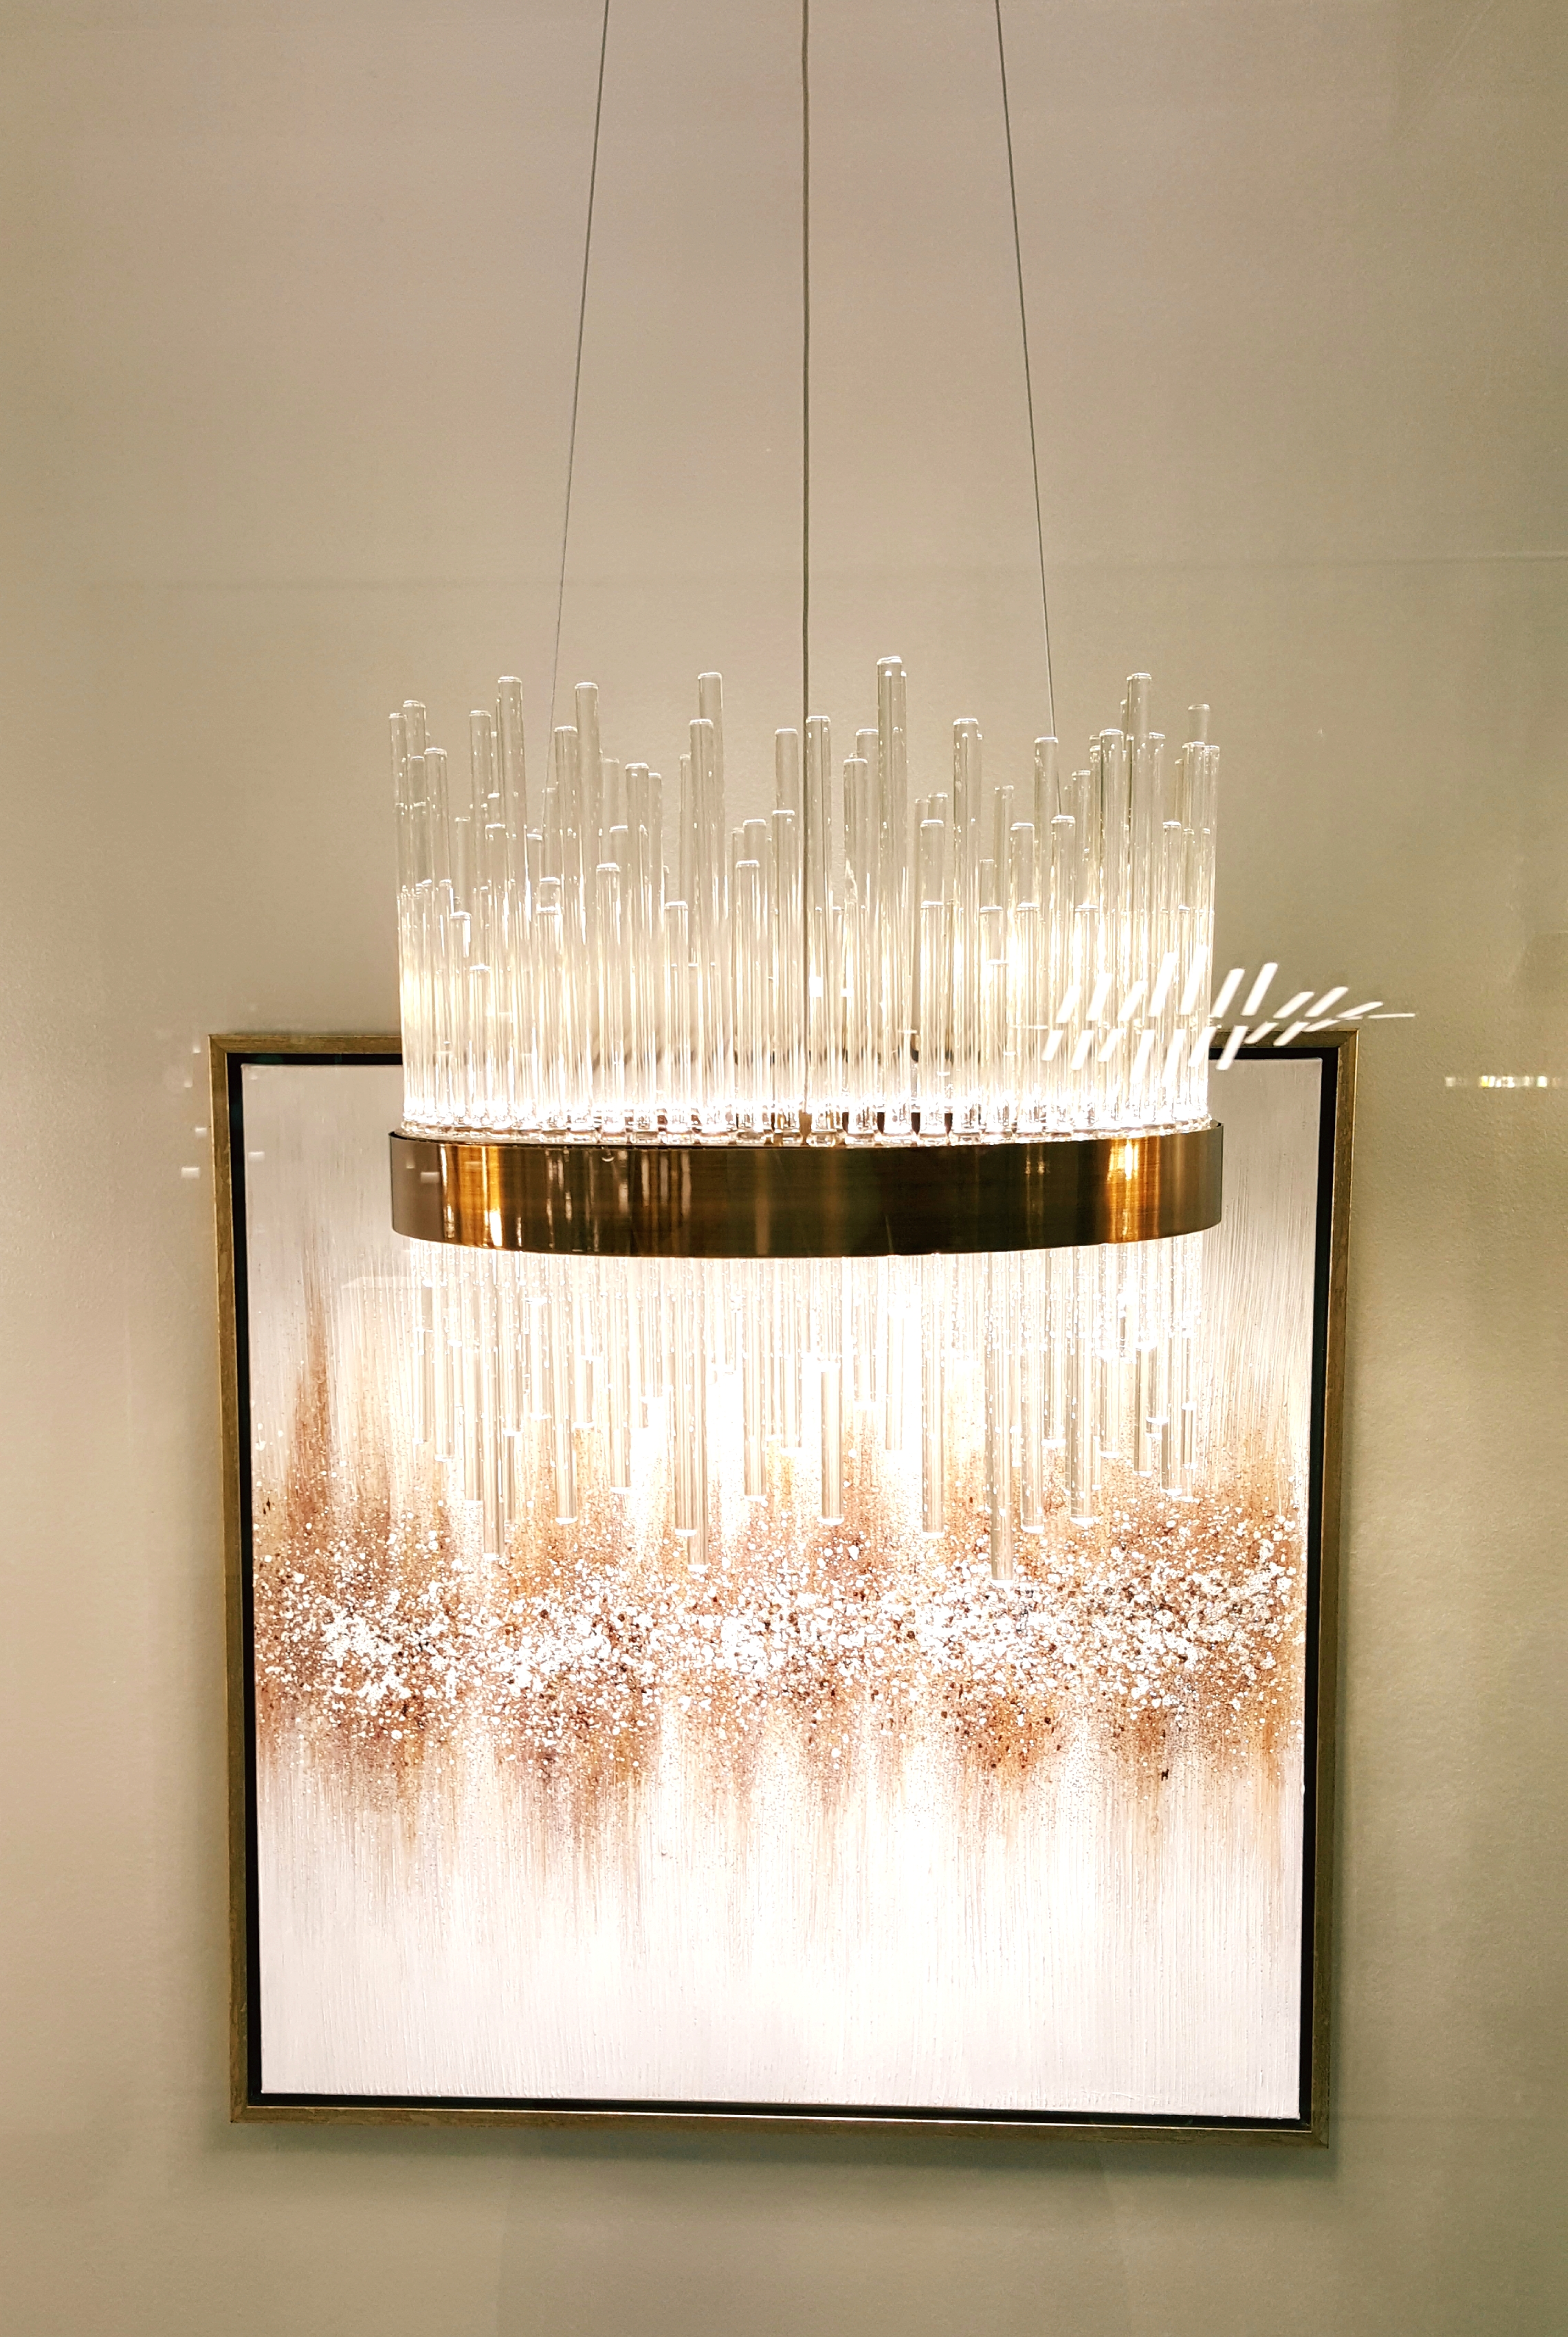 5 Dynamic Ways Chandeliers Add Elegance to a Room - Details on The Pillow Goddess blog!